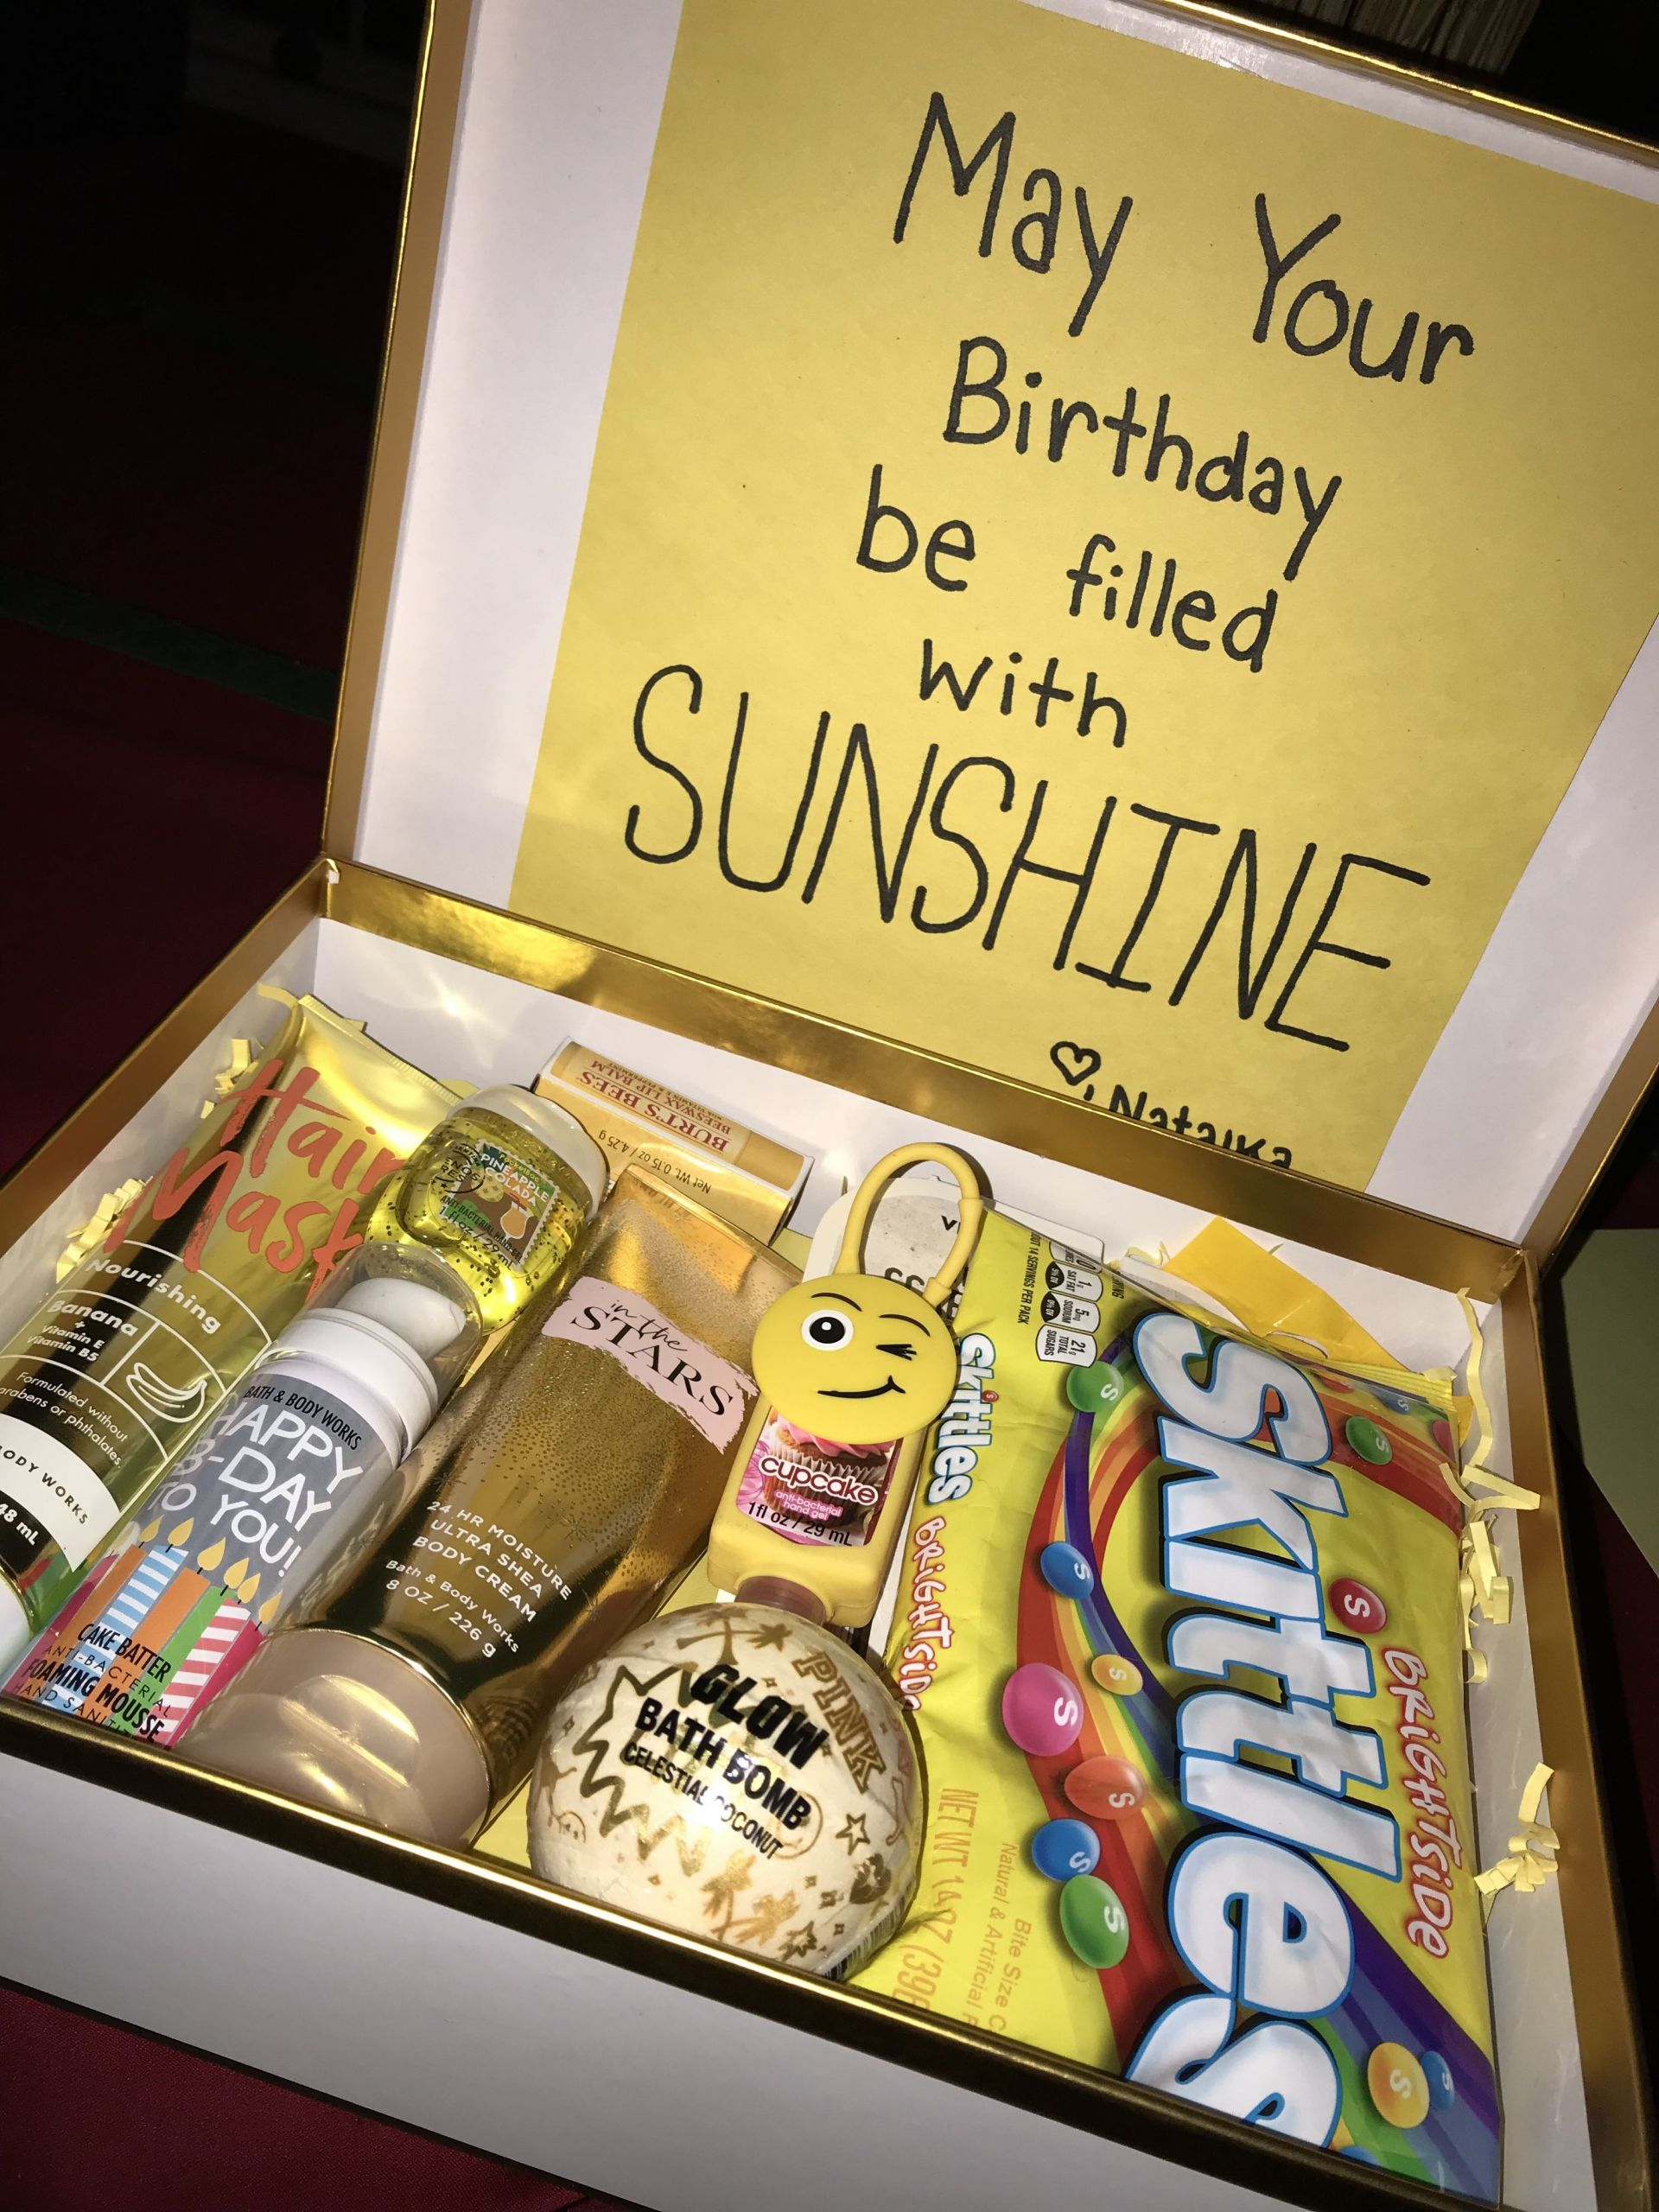 Last Minute Birthday Gift Ideas For Boyfriend
 This is a cute birthday present idea for friends